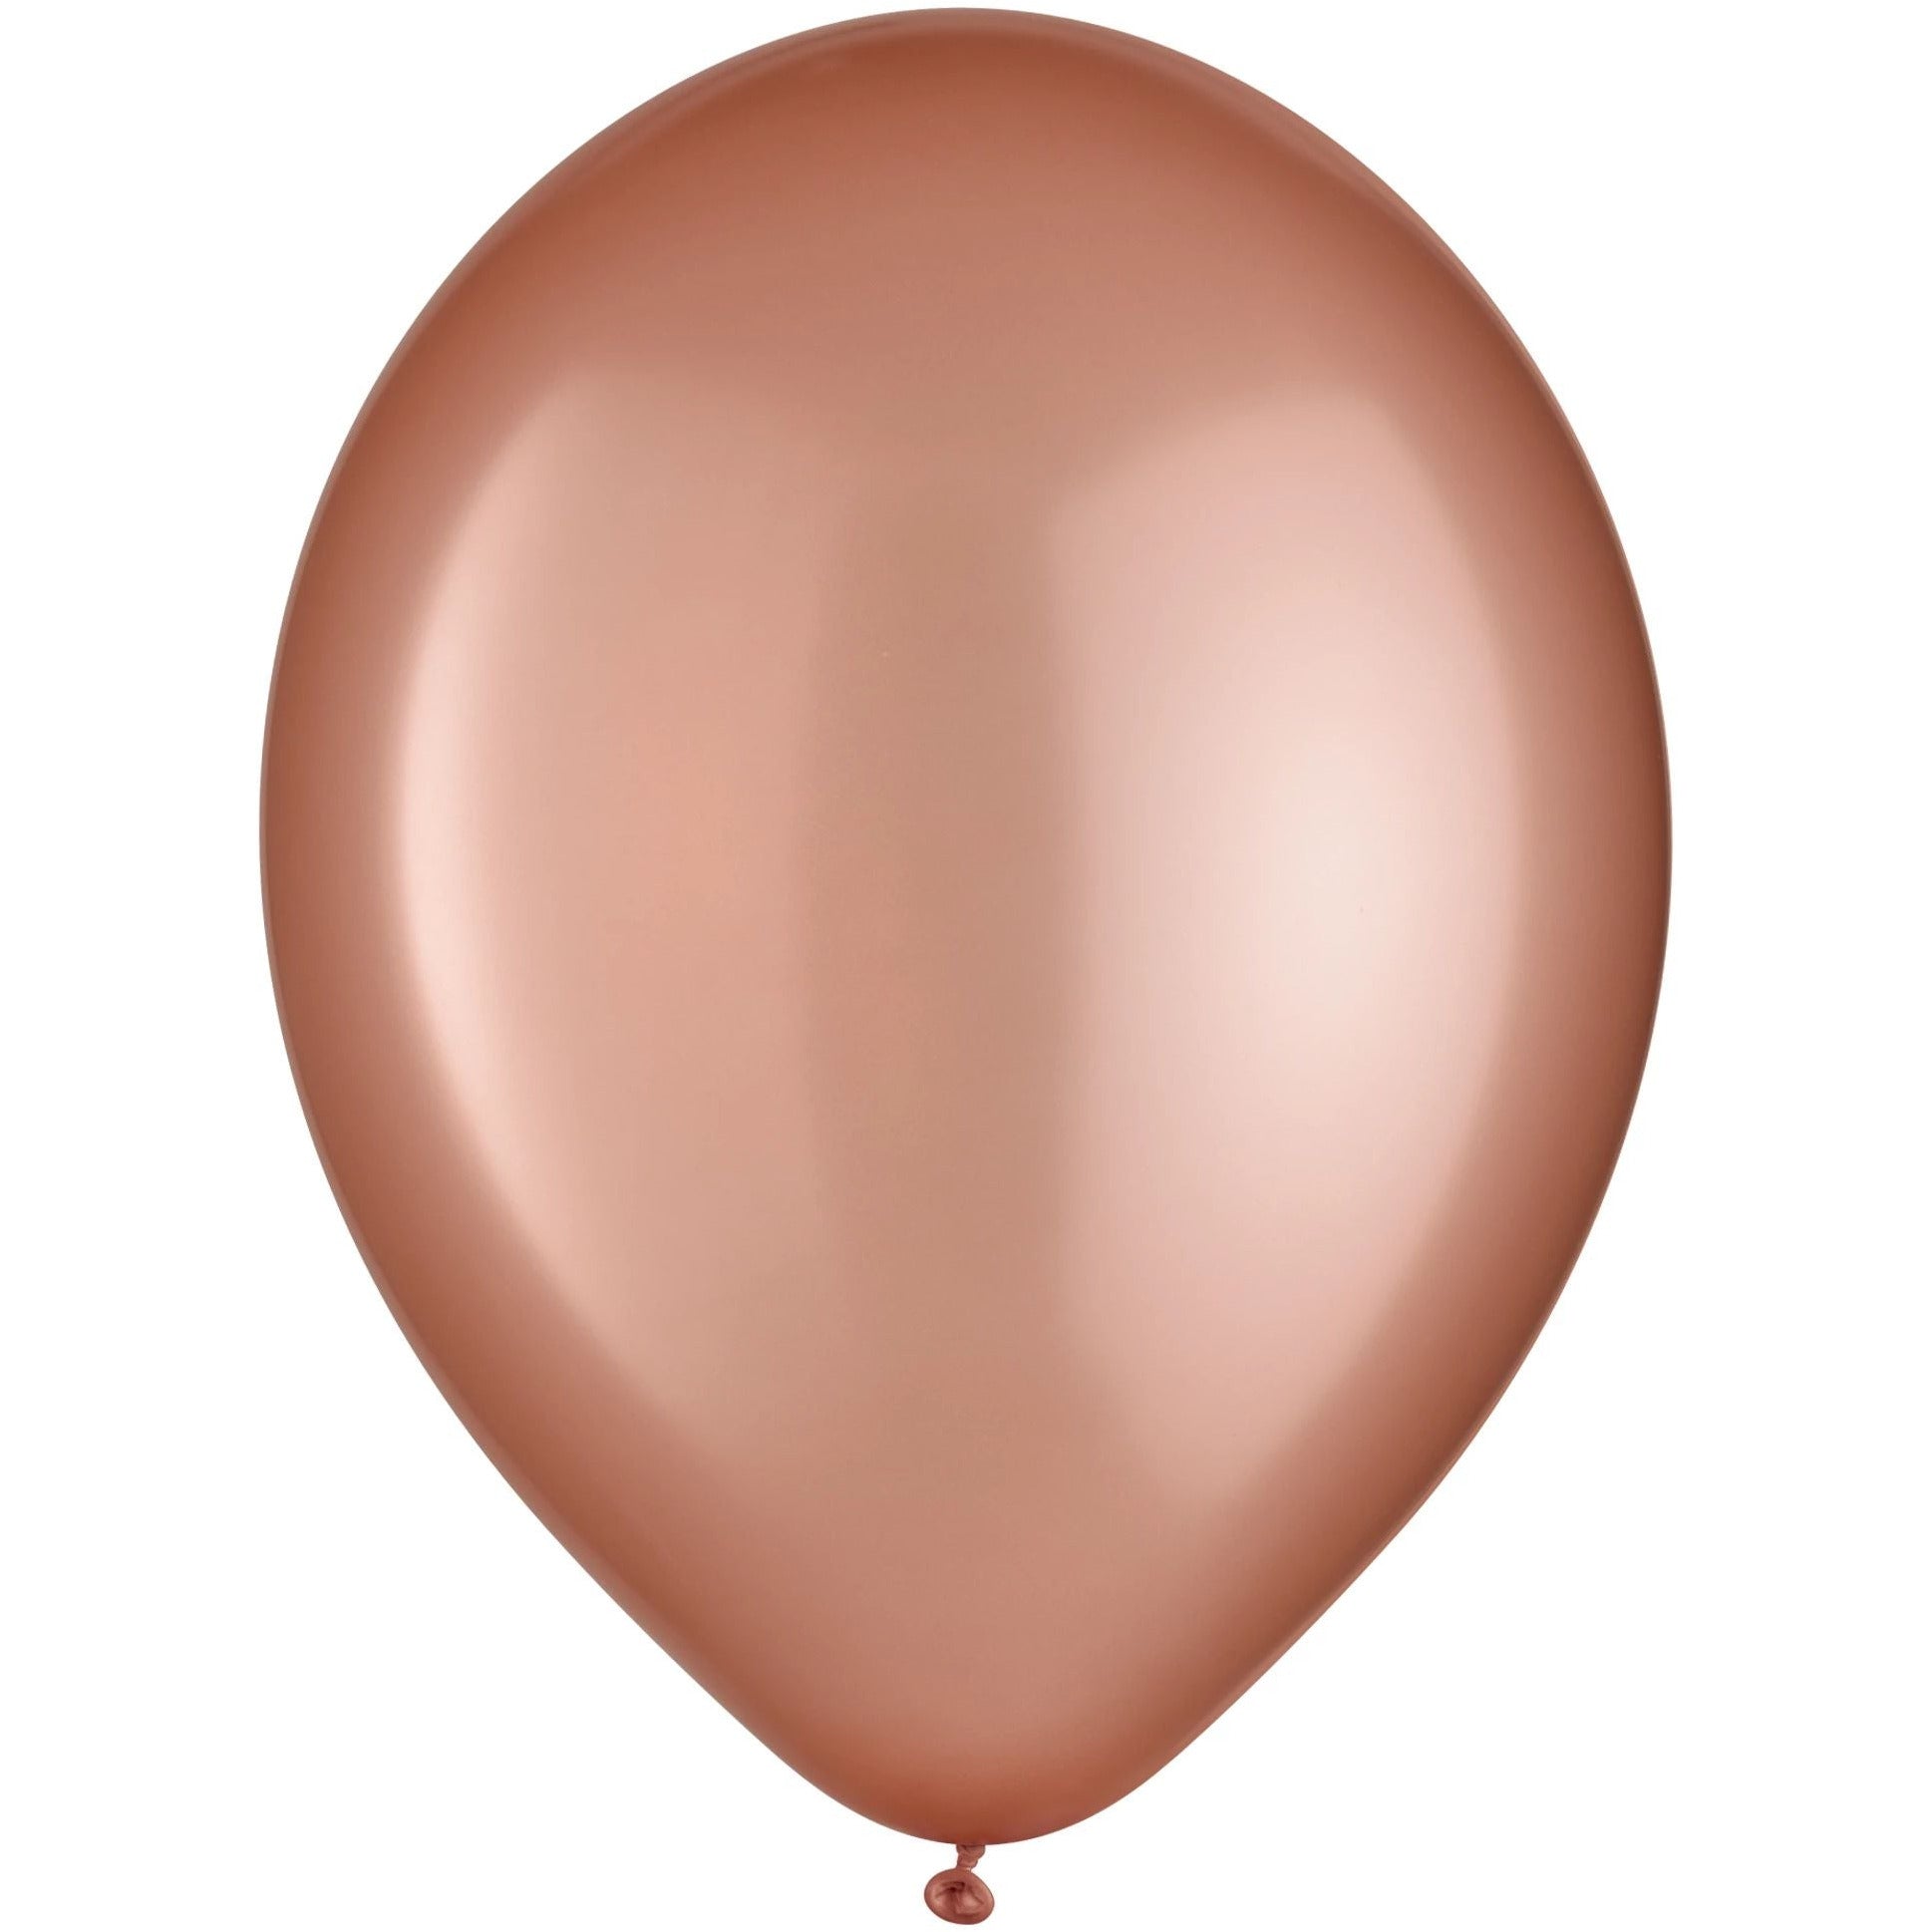 Amscan BALLOONS Latex Balloons - Pearlized Rose Gold, 12"